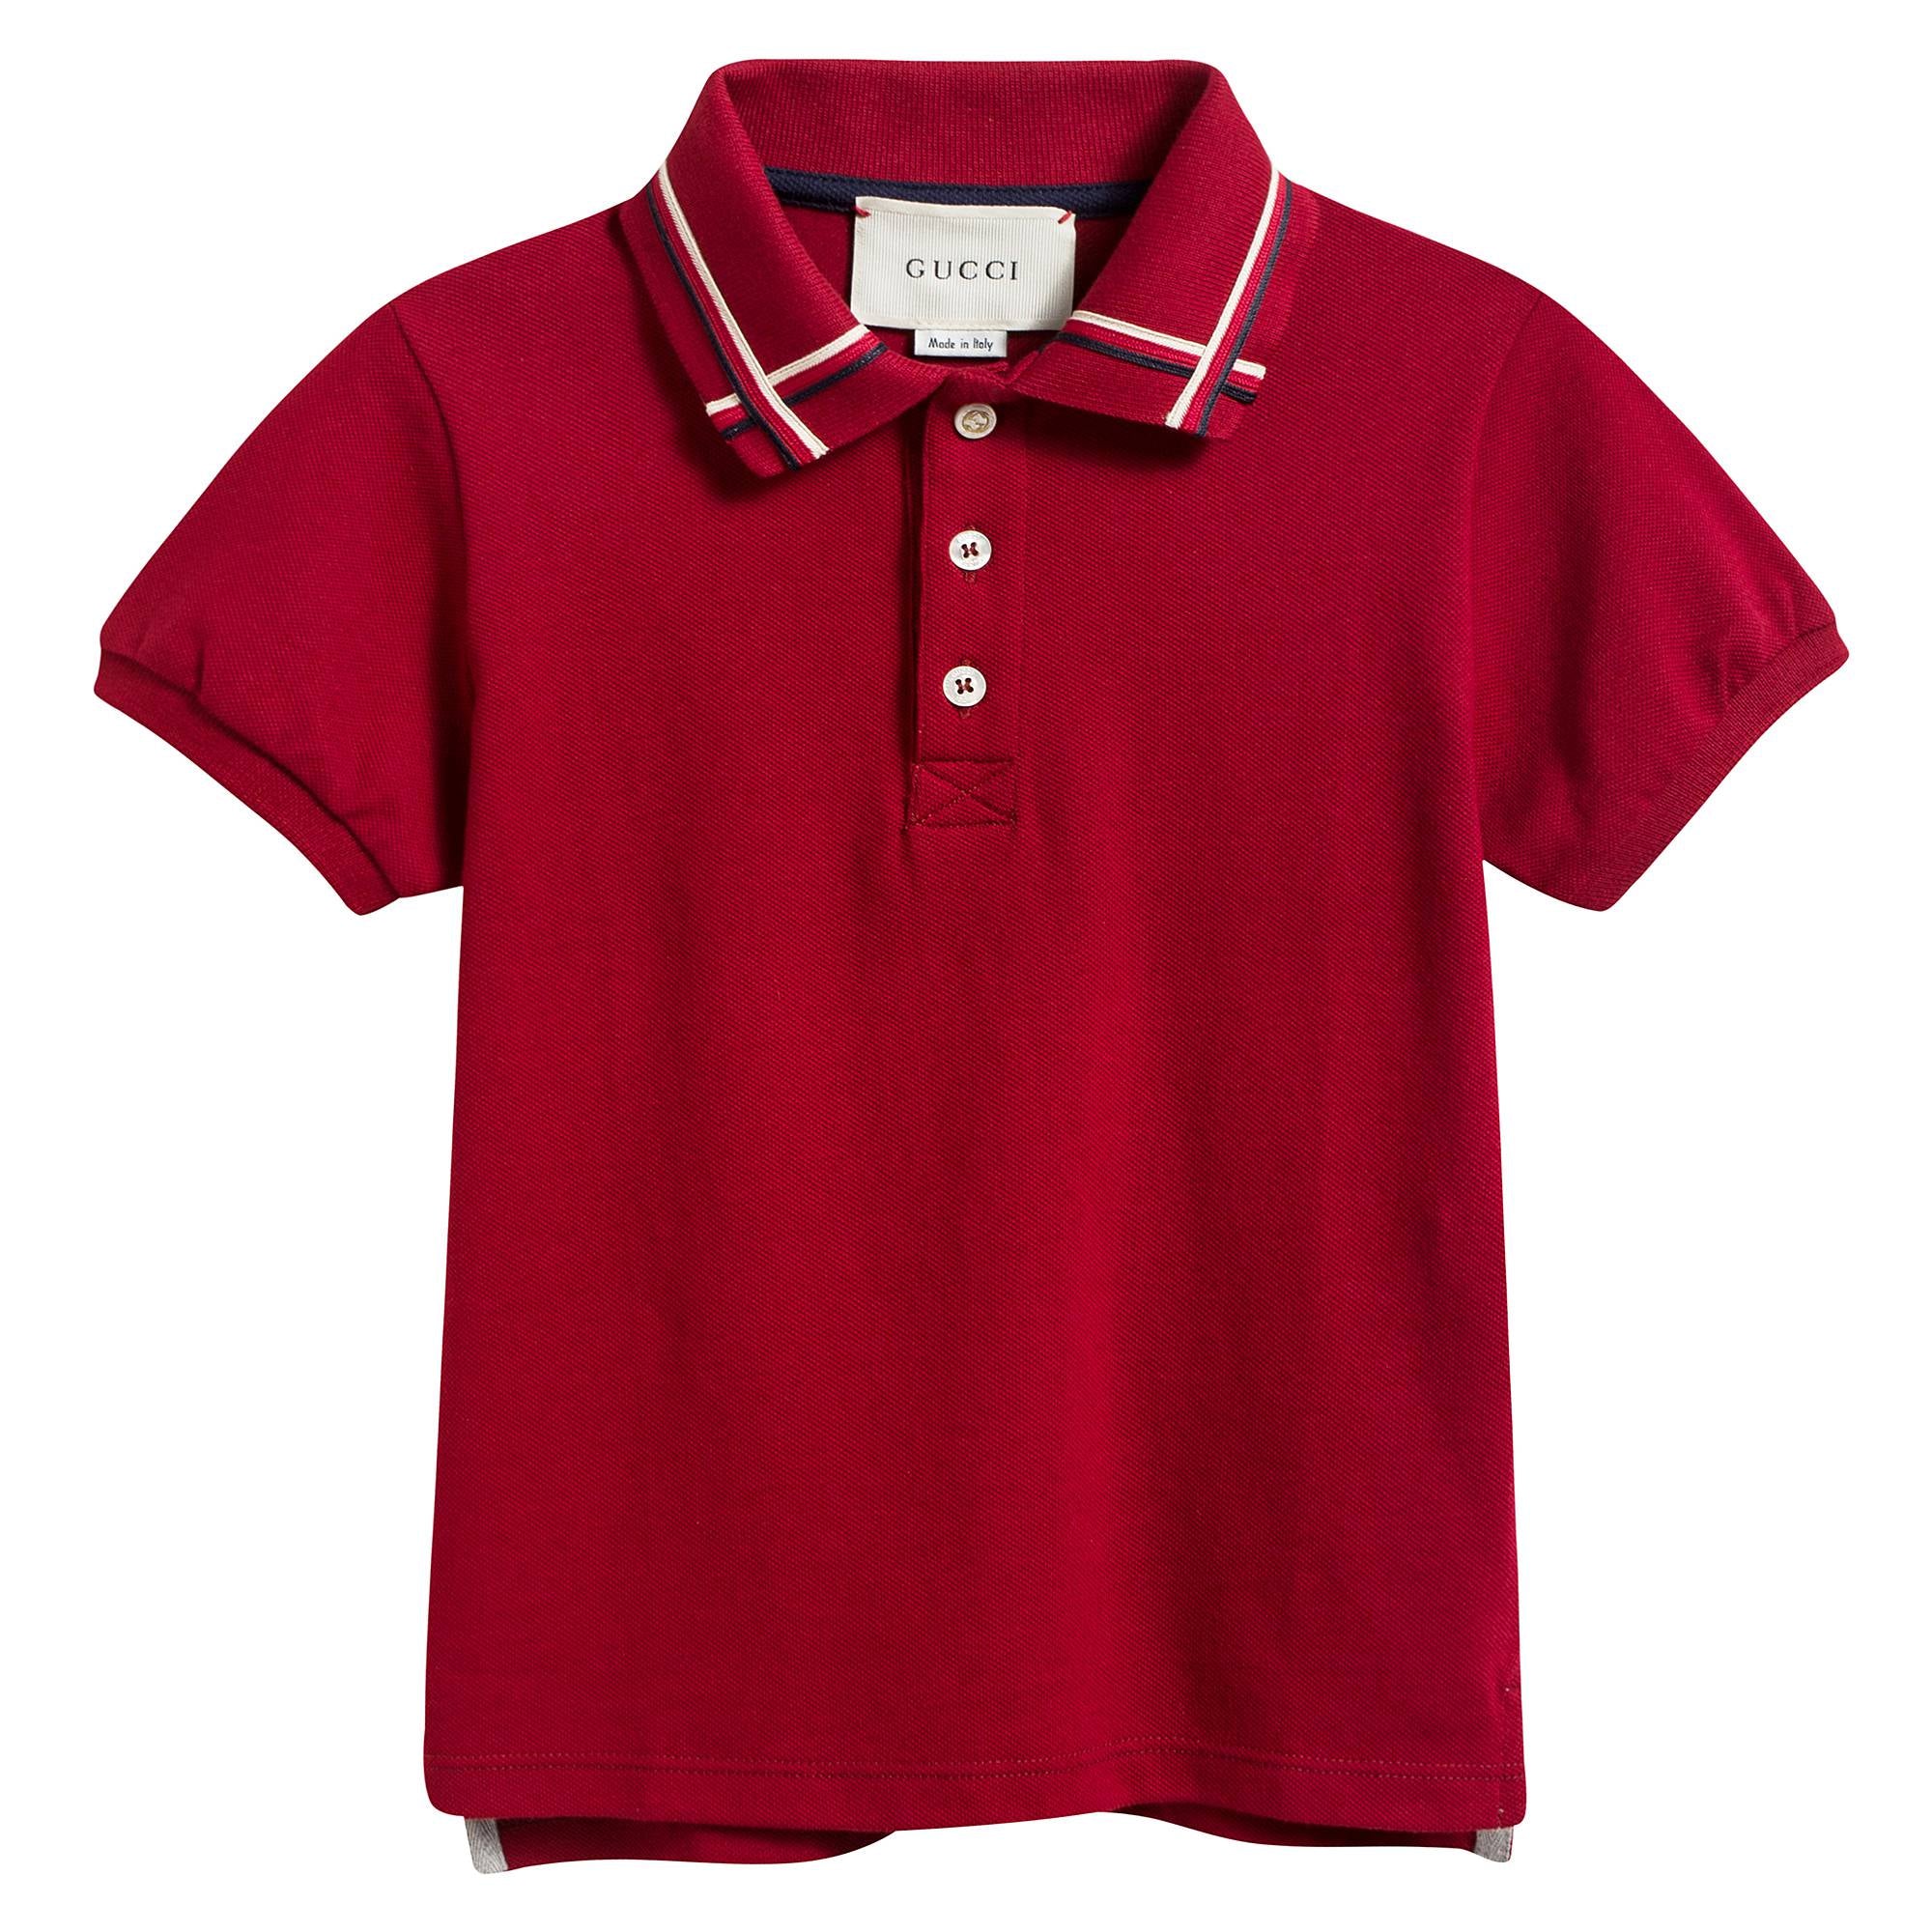 Boys Red Cotton Polo Shirt With Check Trim